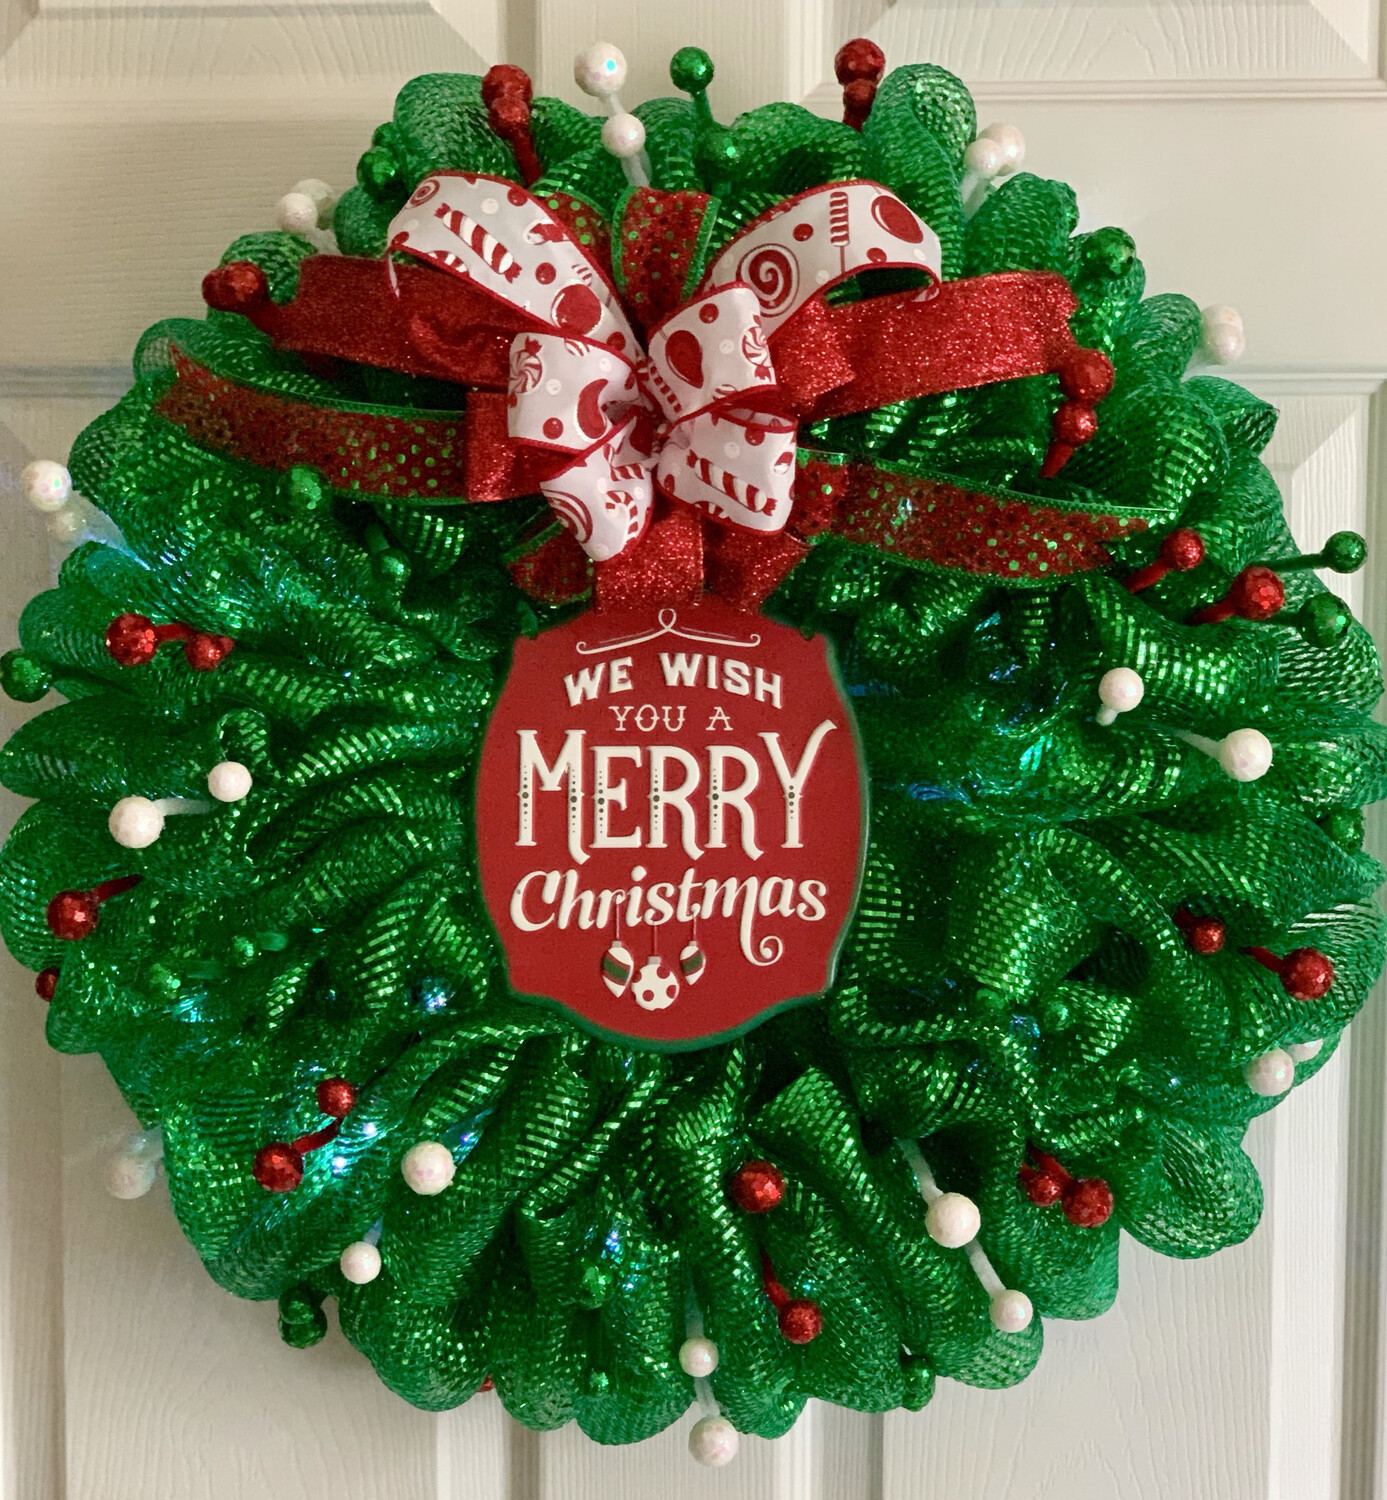 We Wish You a Merry Christmas Wreath Xmas Lights Decoration Holiday Door Decor Christmas Gift A Touch Of Faith